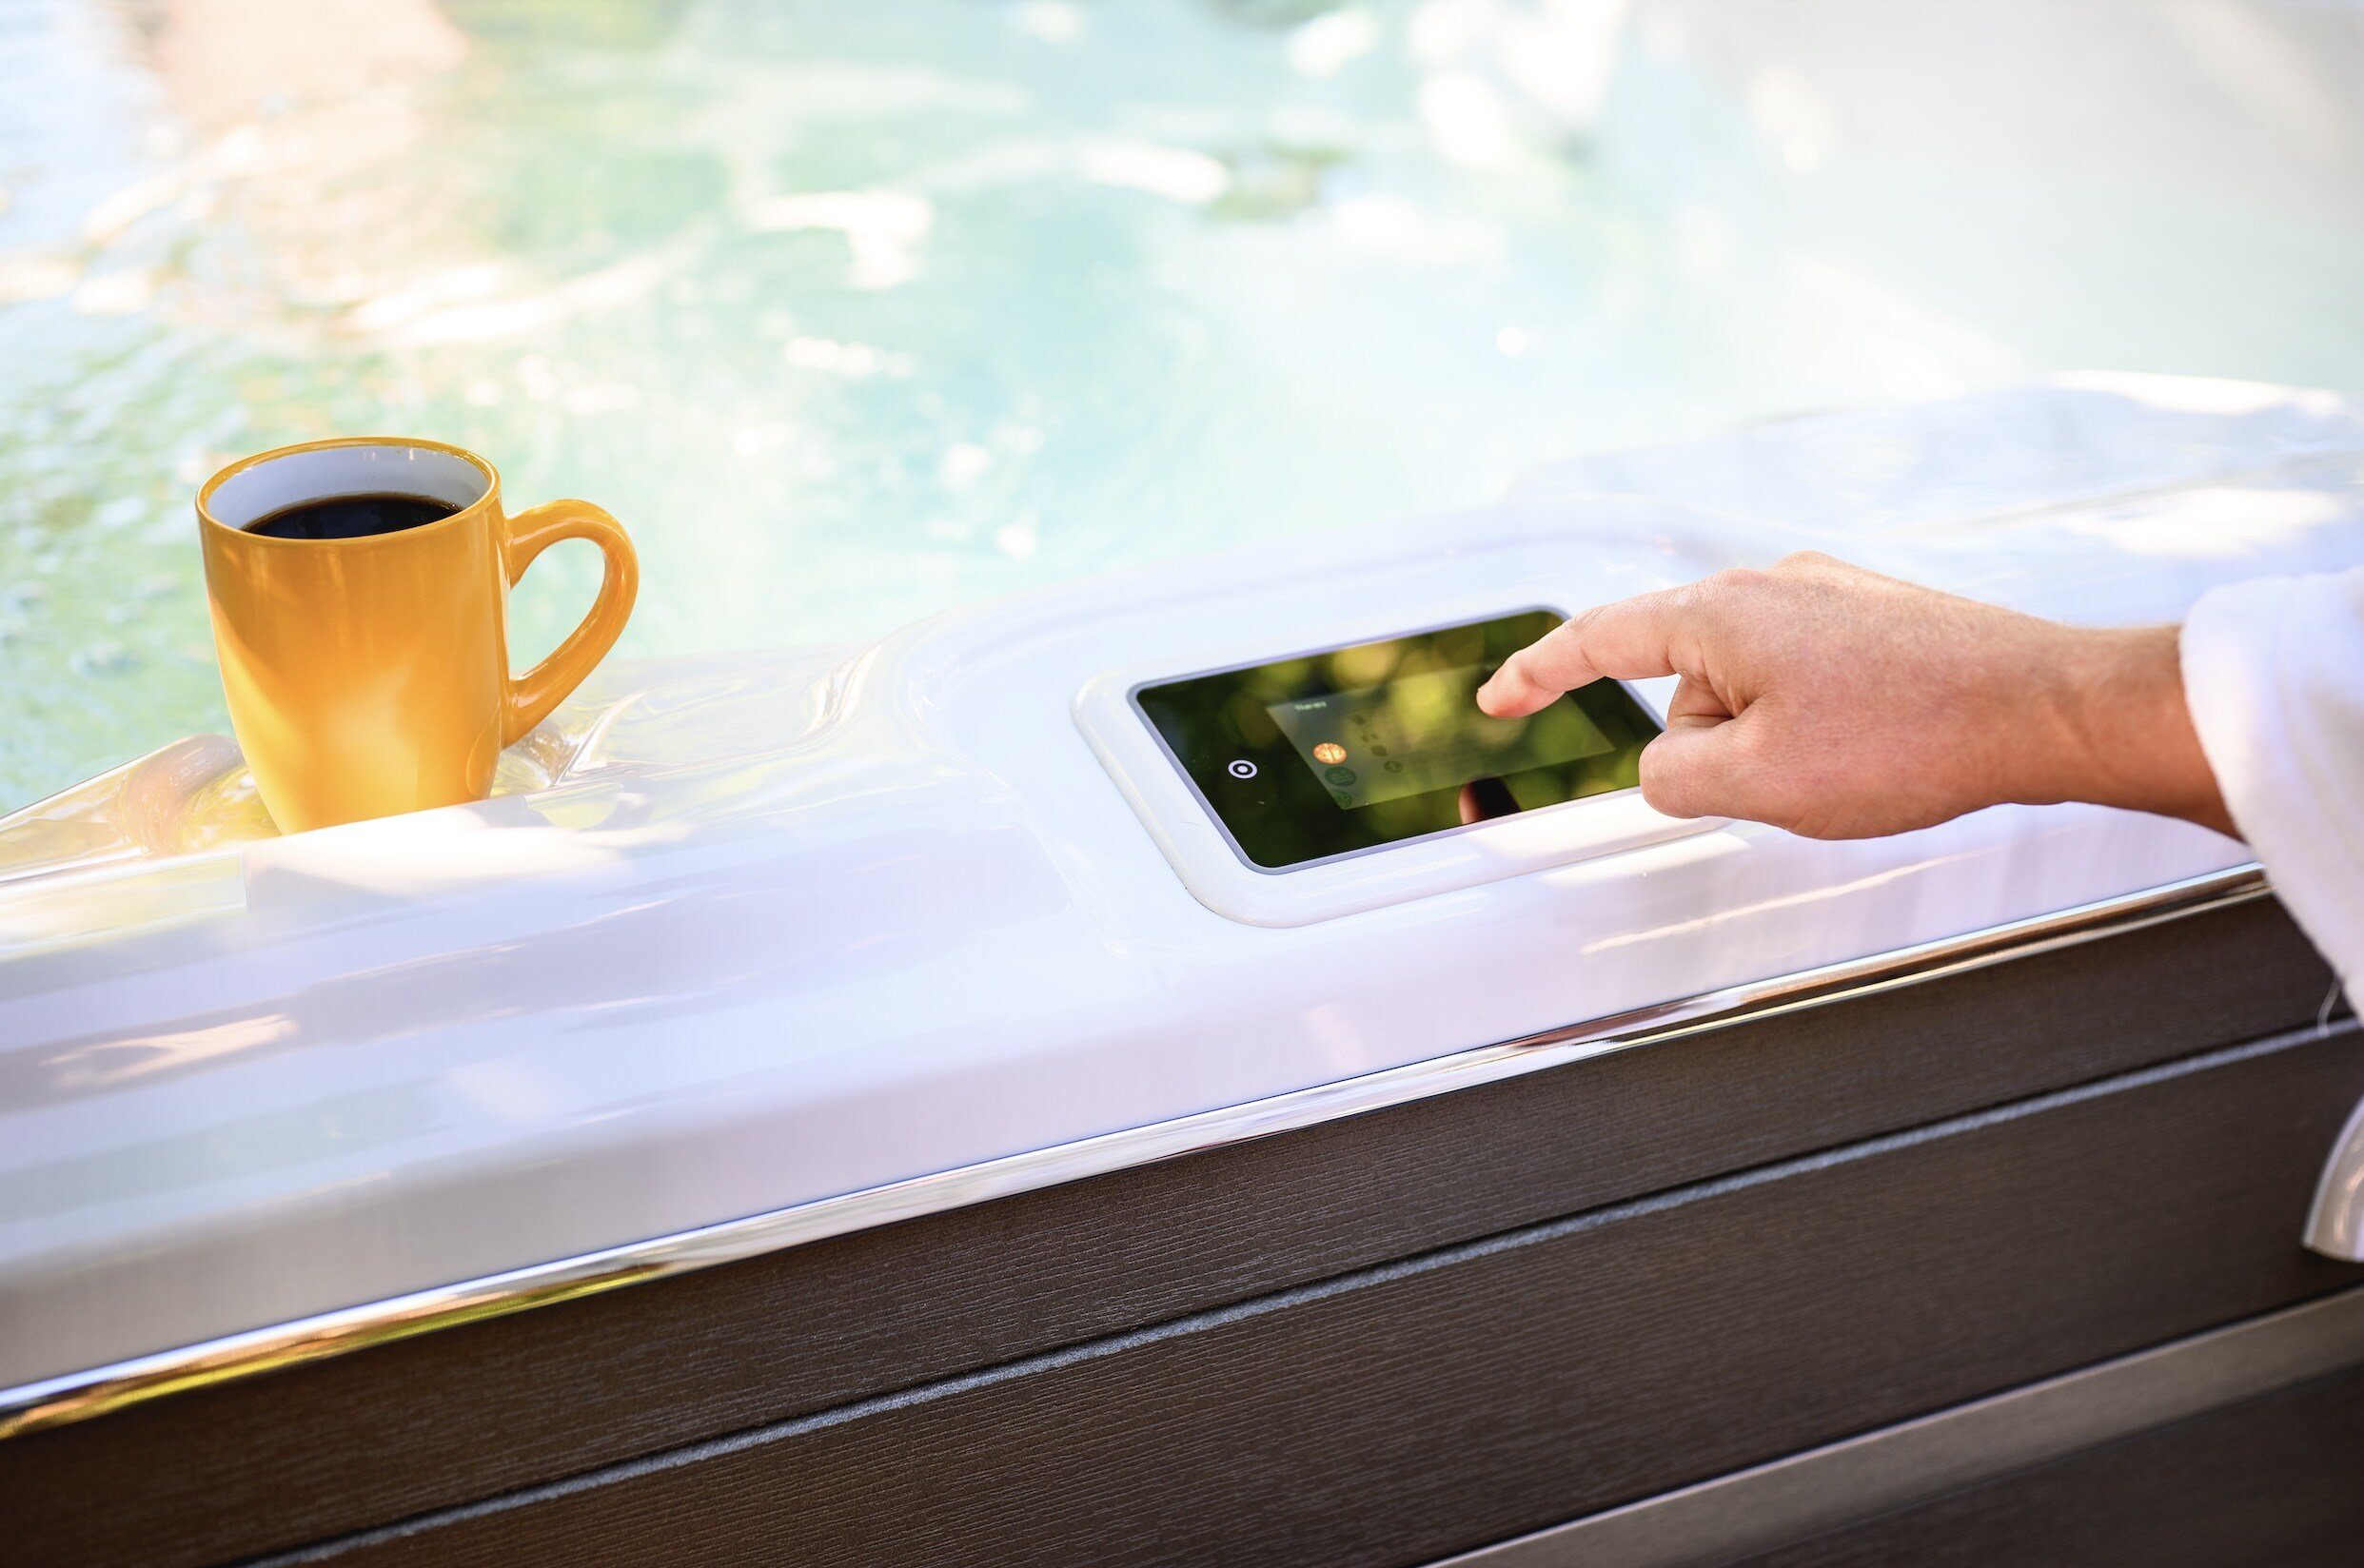 Man's hand pointing at the hydropool hot tub topside control, mustard yellow coffee cup resting on the side of the tub with cerulean hot tub water beyond. 